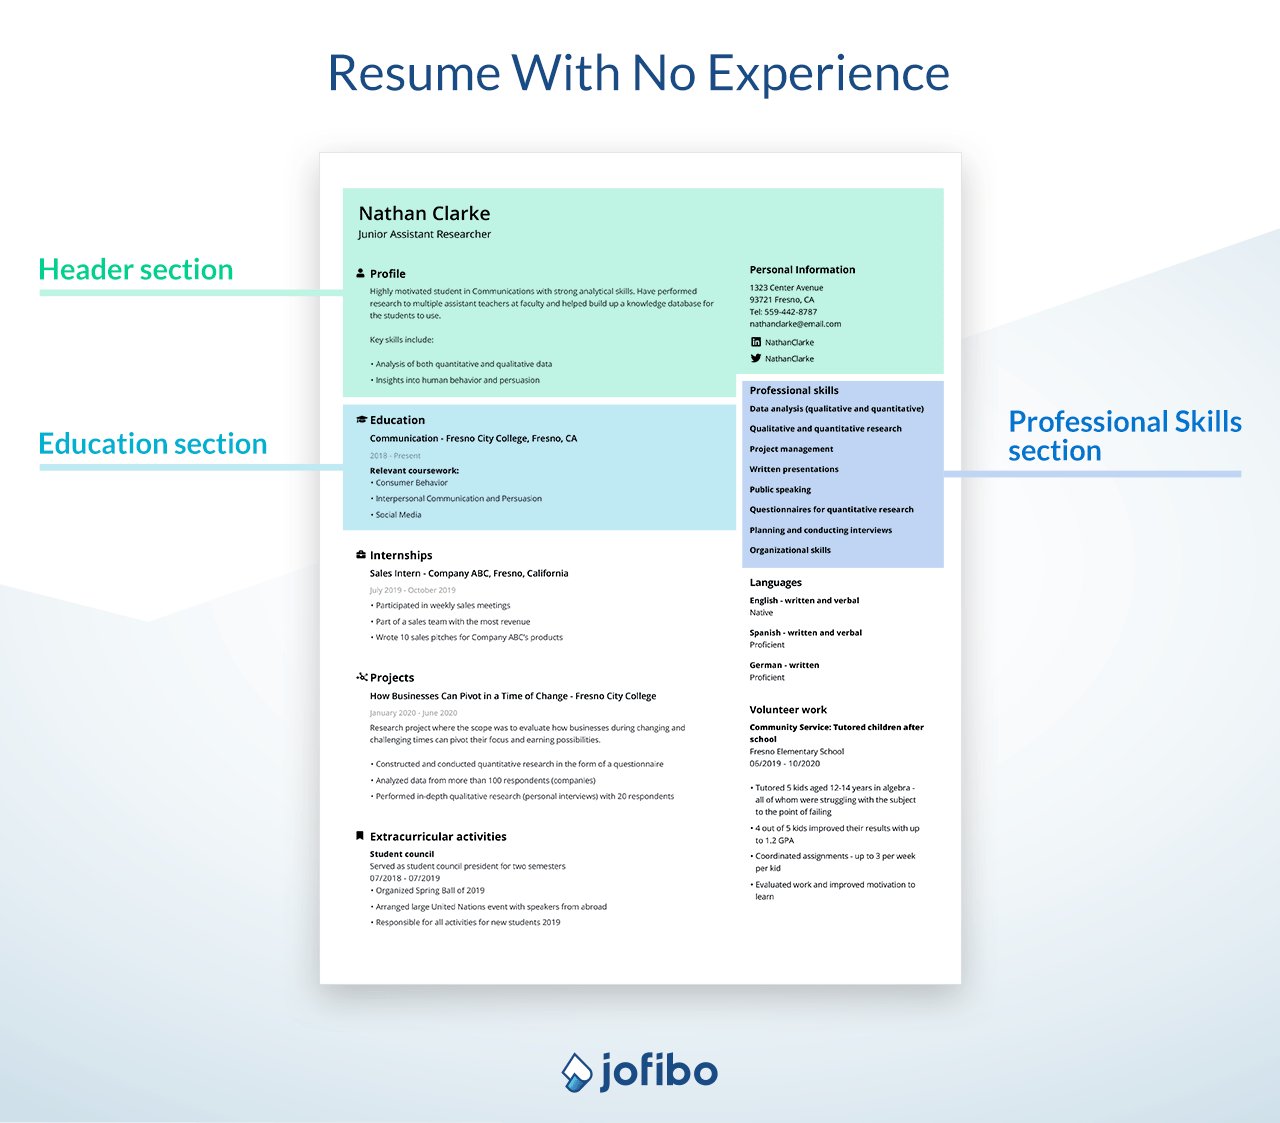 The site he describes in articles about Resume: an important article